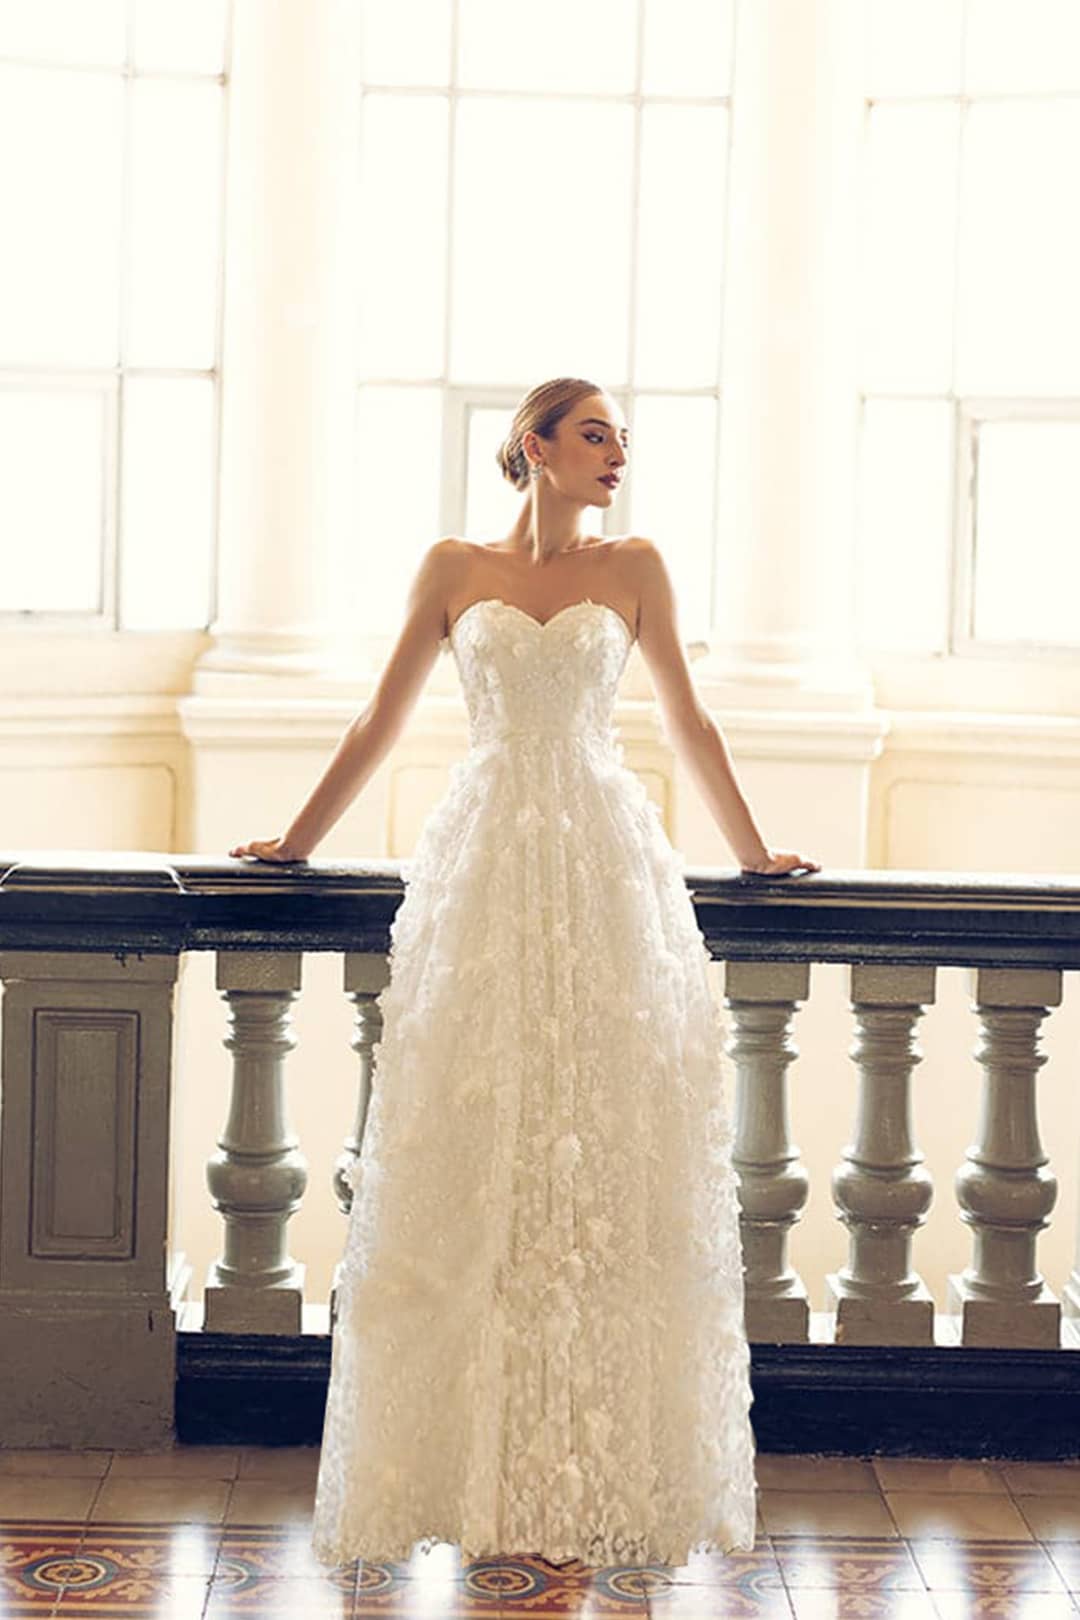 Adela Sweetheart Gown - Bariano Wedding Dress Rental-Rent A Dress Front 1